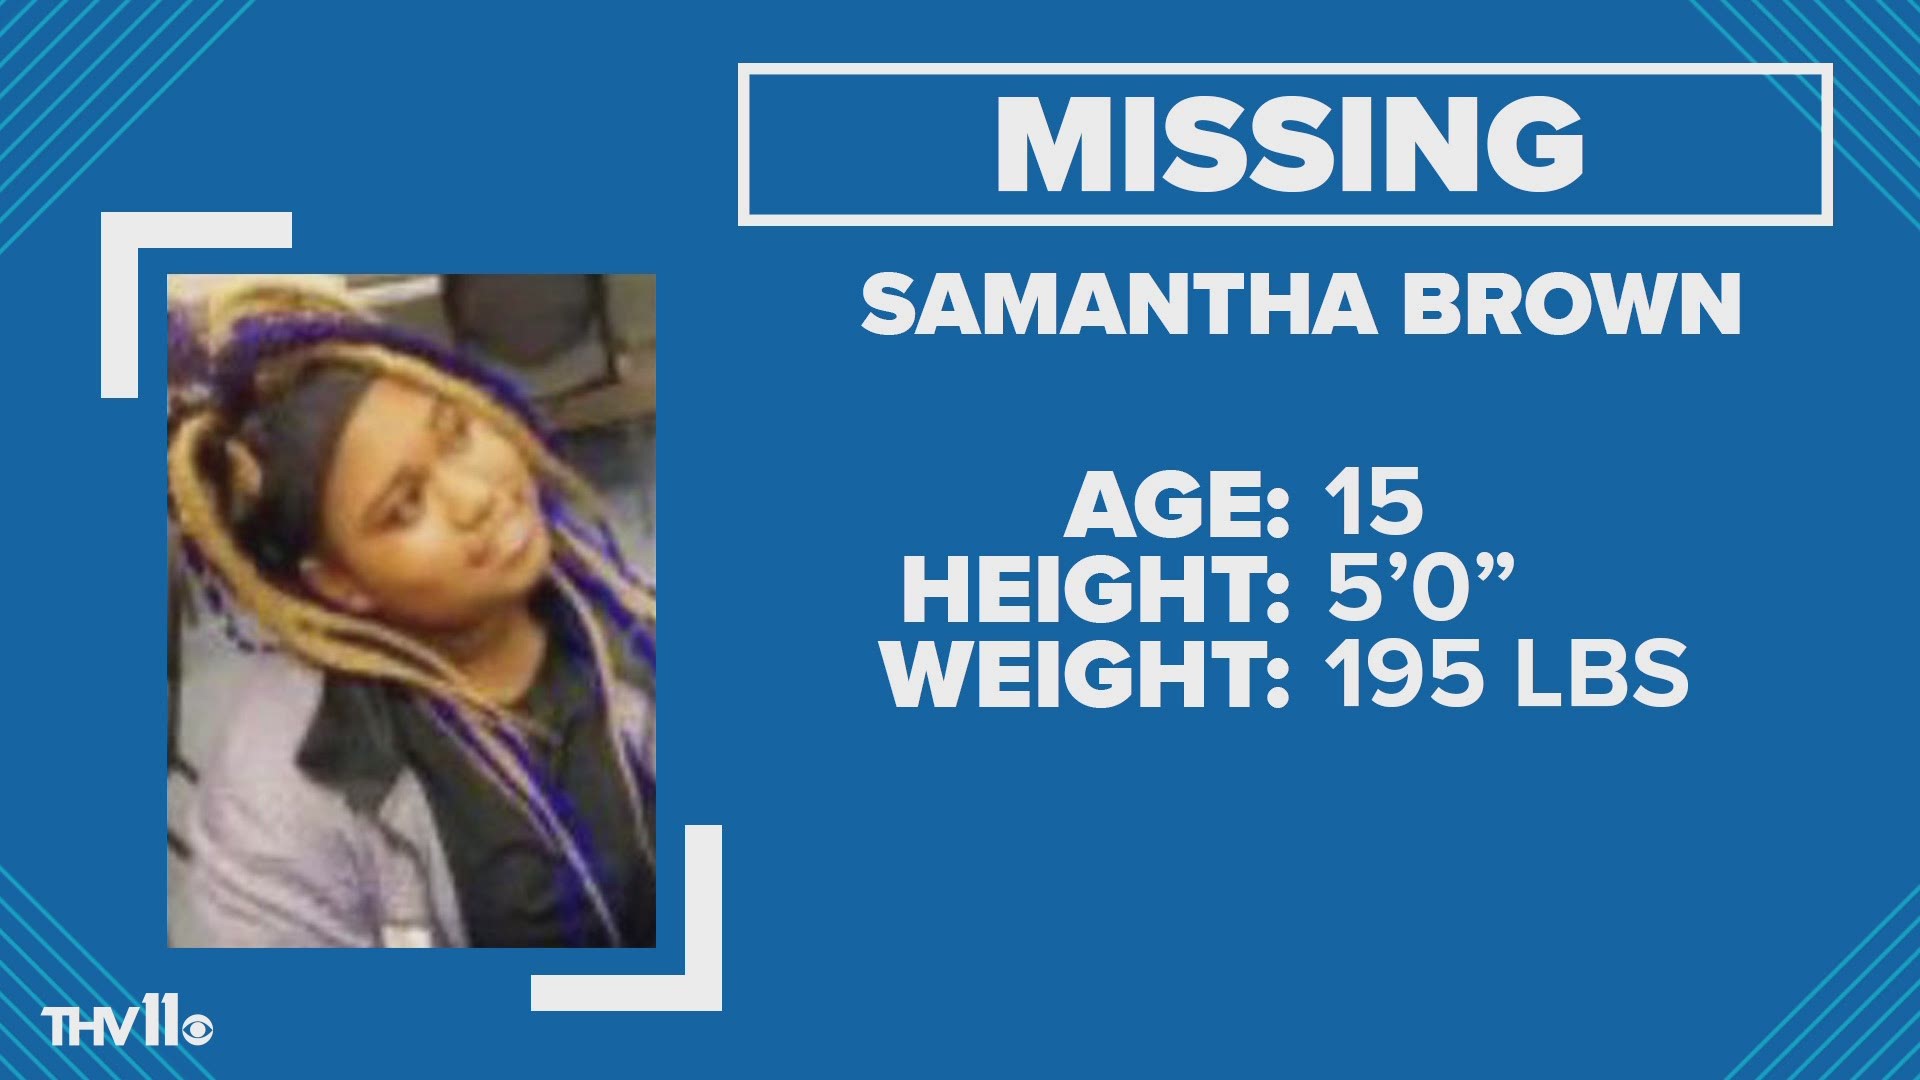 Little Rock police are searching for 15-year-old Samantha Brown, last seen on January 6.